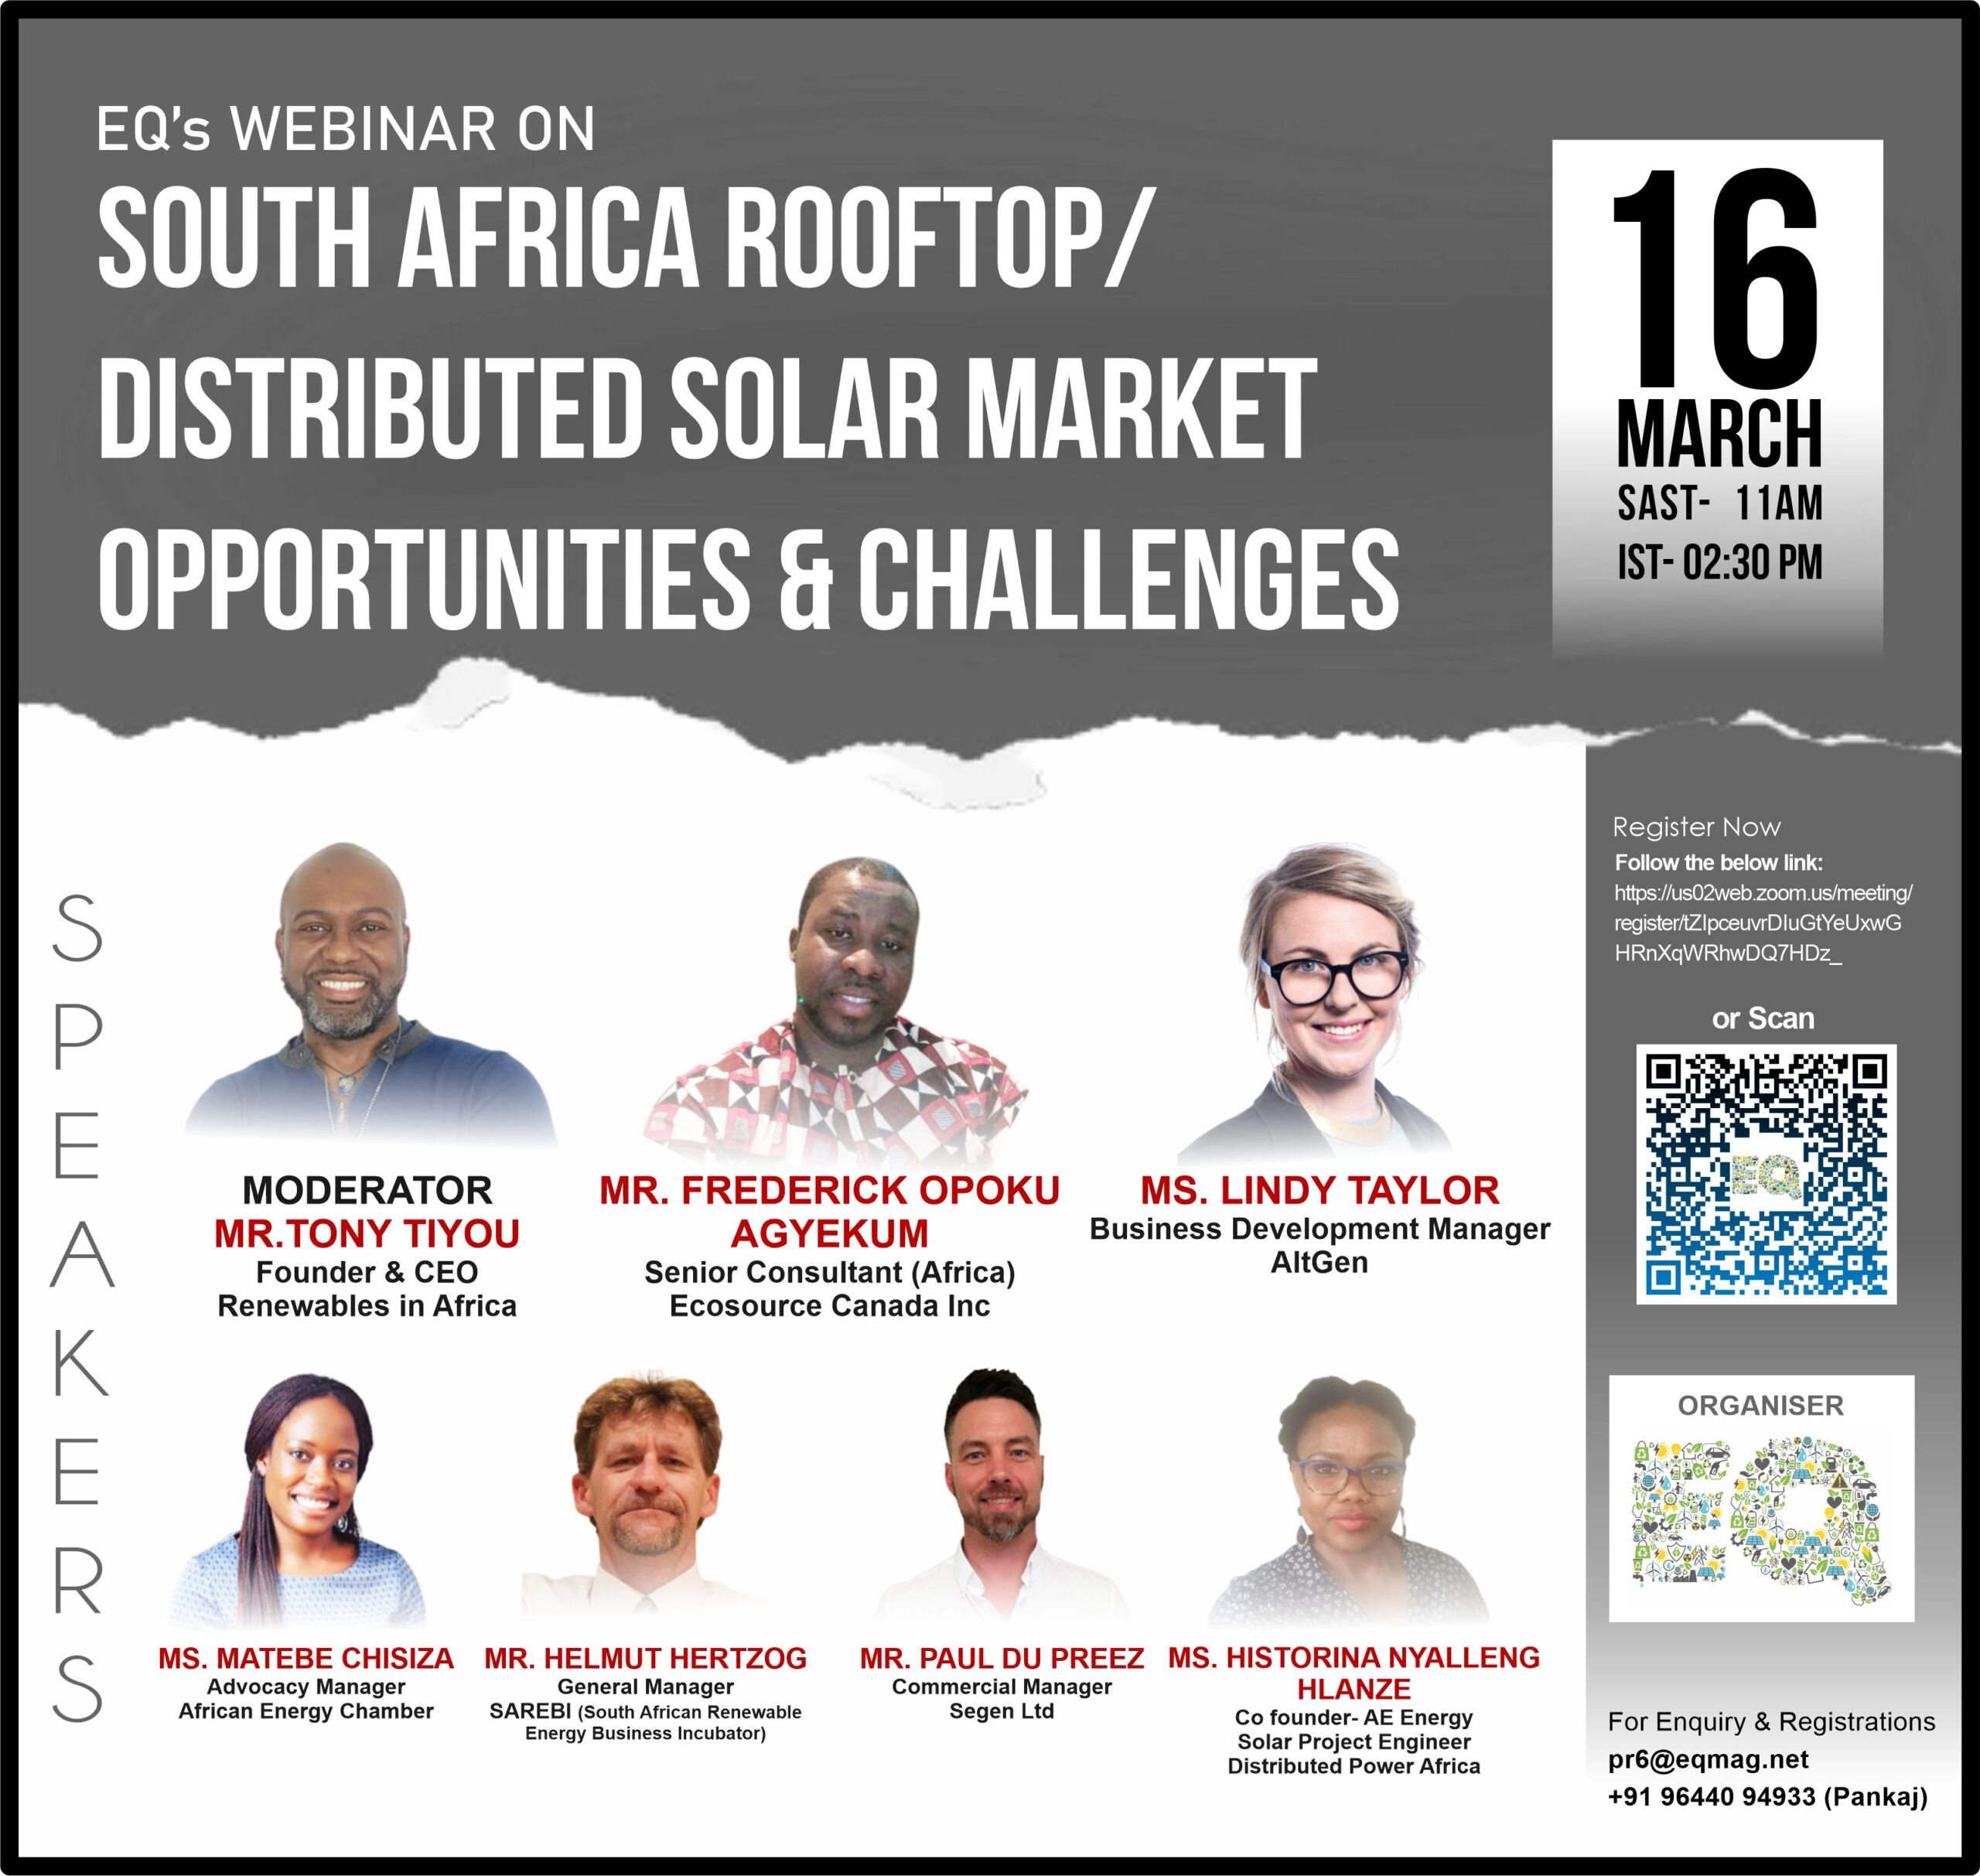 EQ Webinar on South Africa Rooftop & Distributed Solar Market Outlook 16th March 2022 (Wednesday) 2:30 PM Onwards….Register Now!